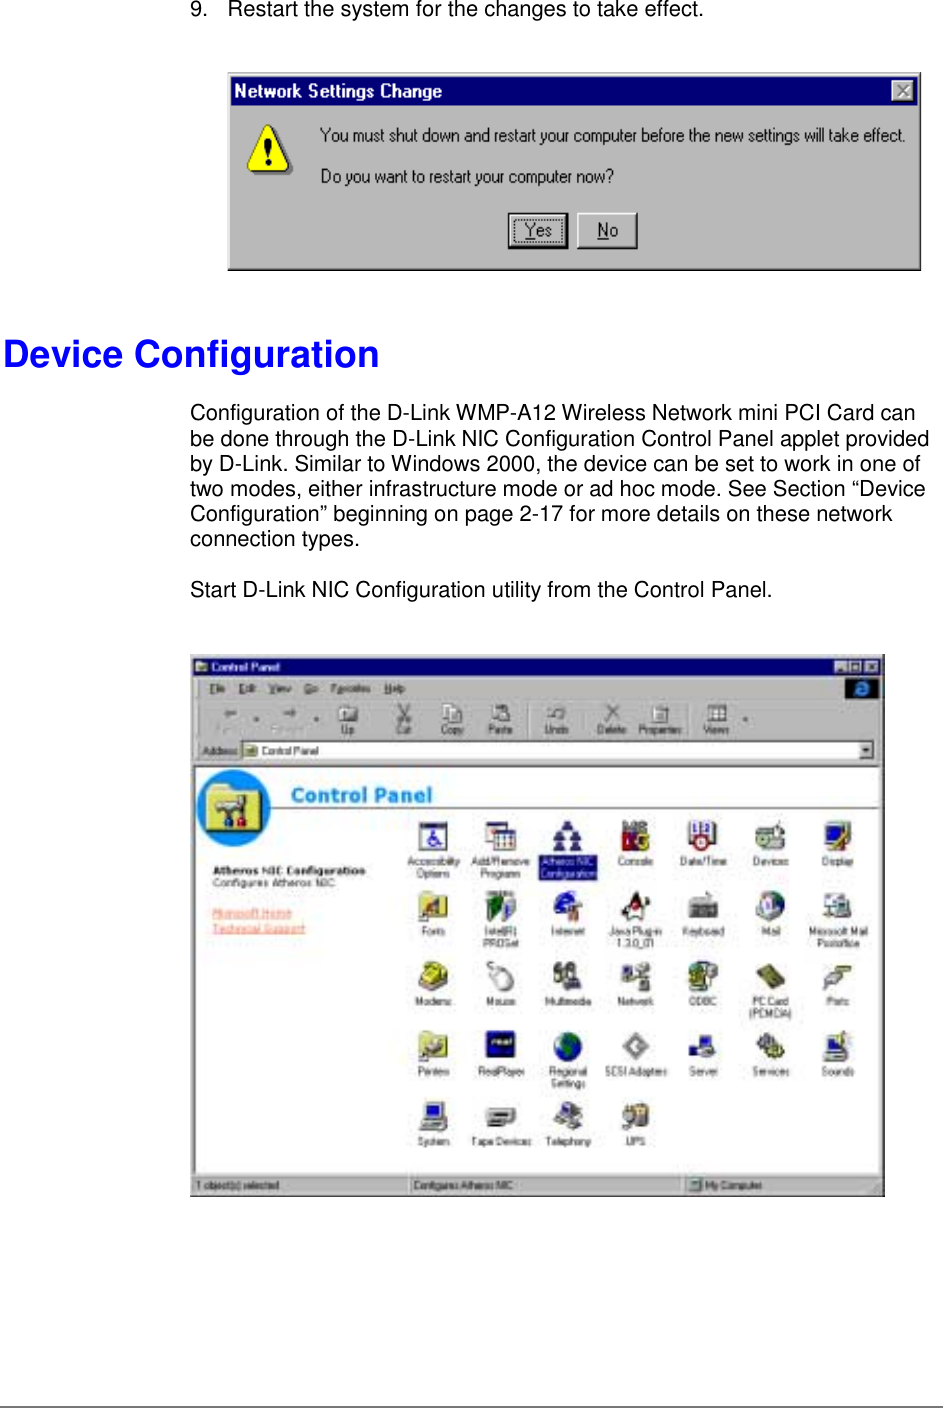 9.  Restart the system for the changes to take effect.Device ConfigurationConfiguration of the D-Link WMP-A12 Wireless Network mini PCI Card canbe done through the D-Link NIC Configuration Control Panel applet providedby D-Link. Similar to Windows 2000, the device can be set to work in one oftwo modes, either infrastructure mode or ad hoc mode. See Section “DeviceConfiguration” beginning on page 2-17 for more details on these networkconnection types.Start D-Link NIC Configuration utility from the Control Panel.